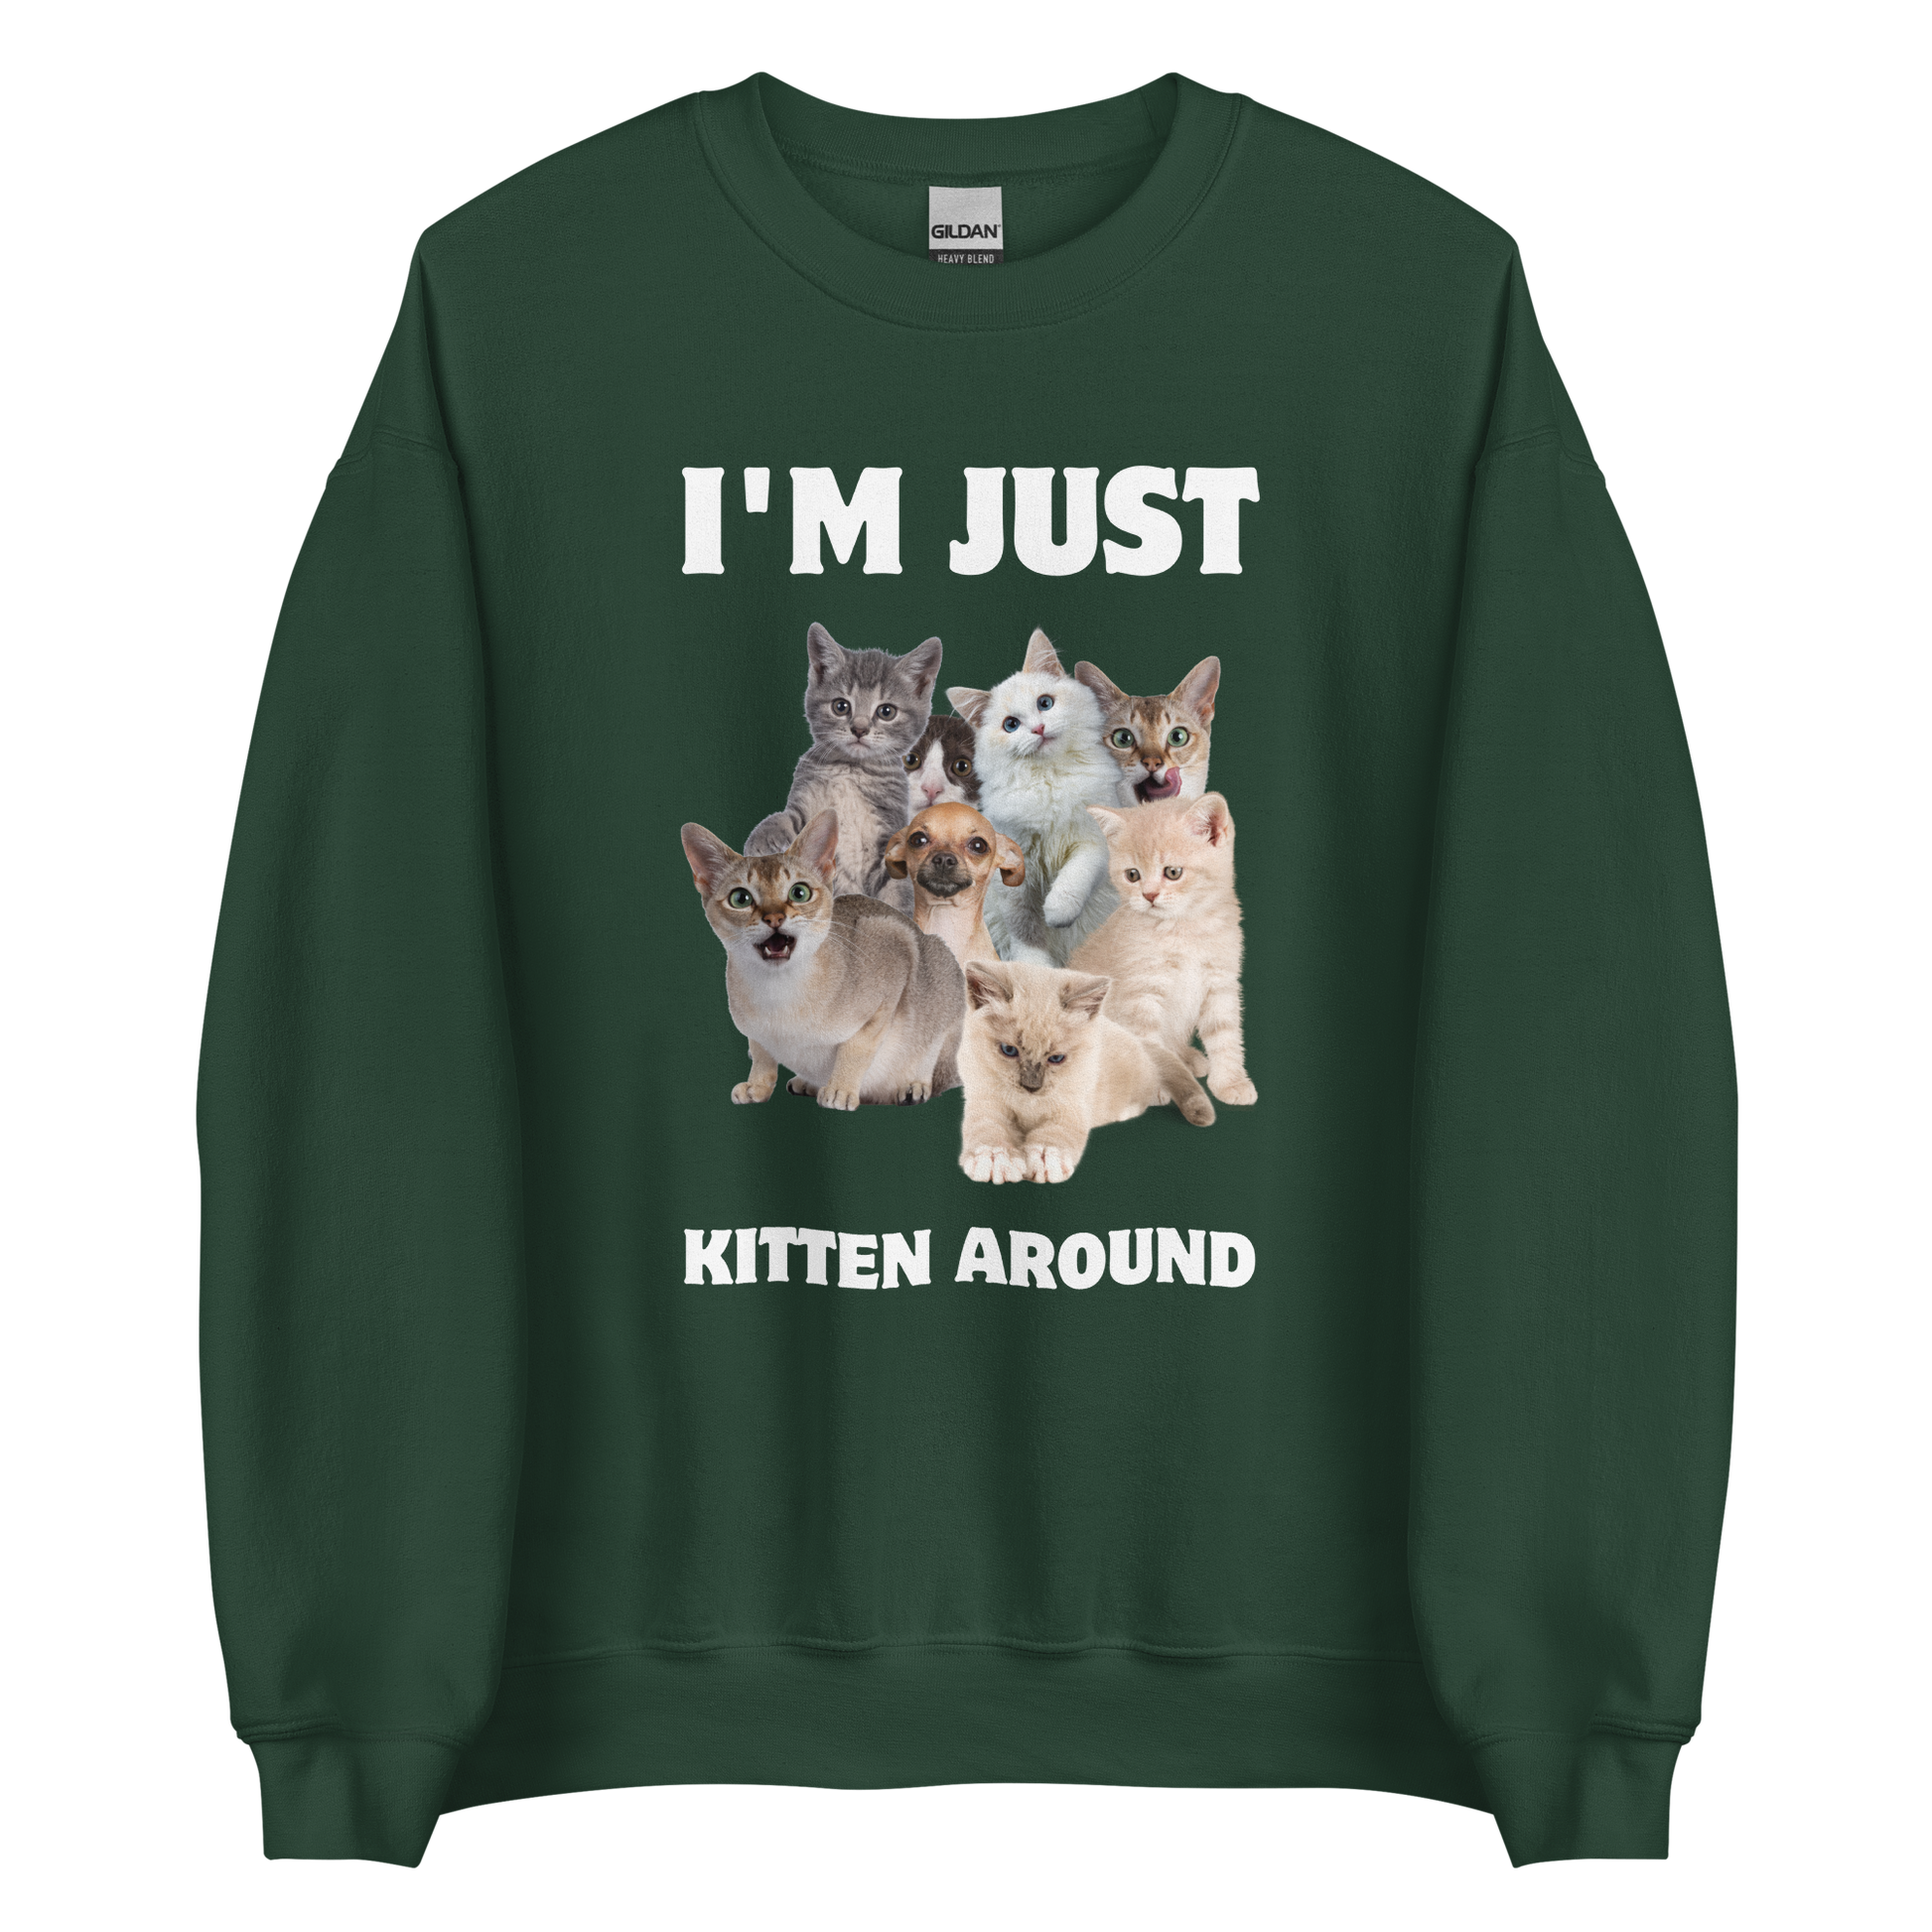 Forest Green Cat Sweatshirt featuring an I'm Just Kitten Around graphic on the chest - Funny Graphic Cat Sweatshirts - Boozy Fox